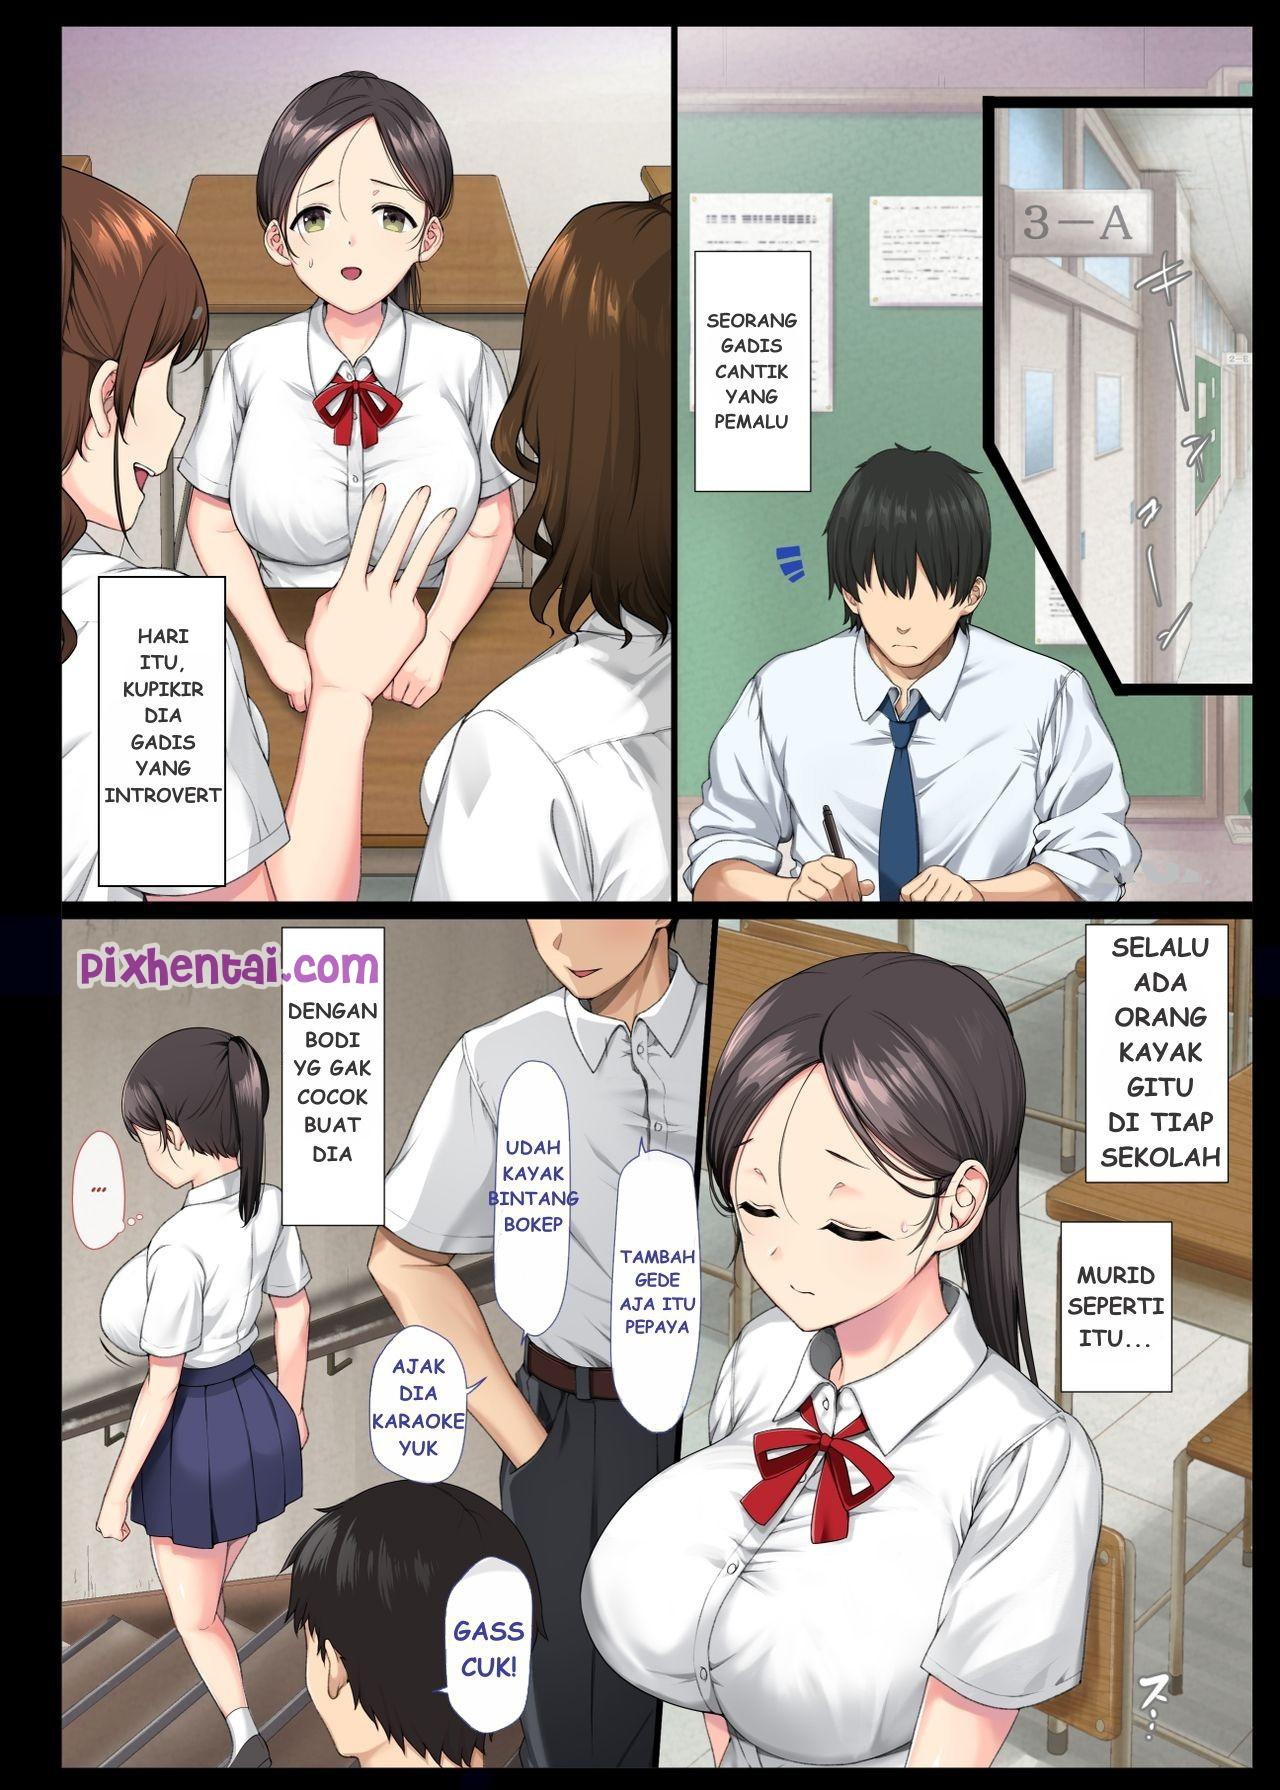 Komik Hentai Introverted Beauty Gets Raped Over and Over by Her Homeroom Teacher Manga XXX Porn Doujin Sex Bokep 04